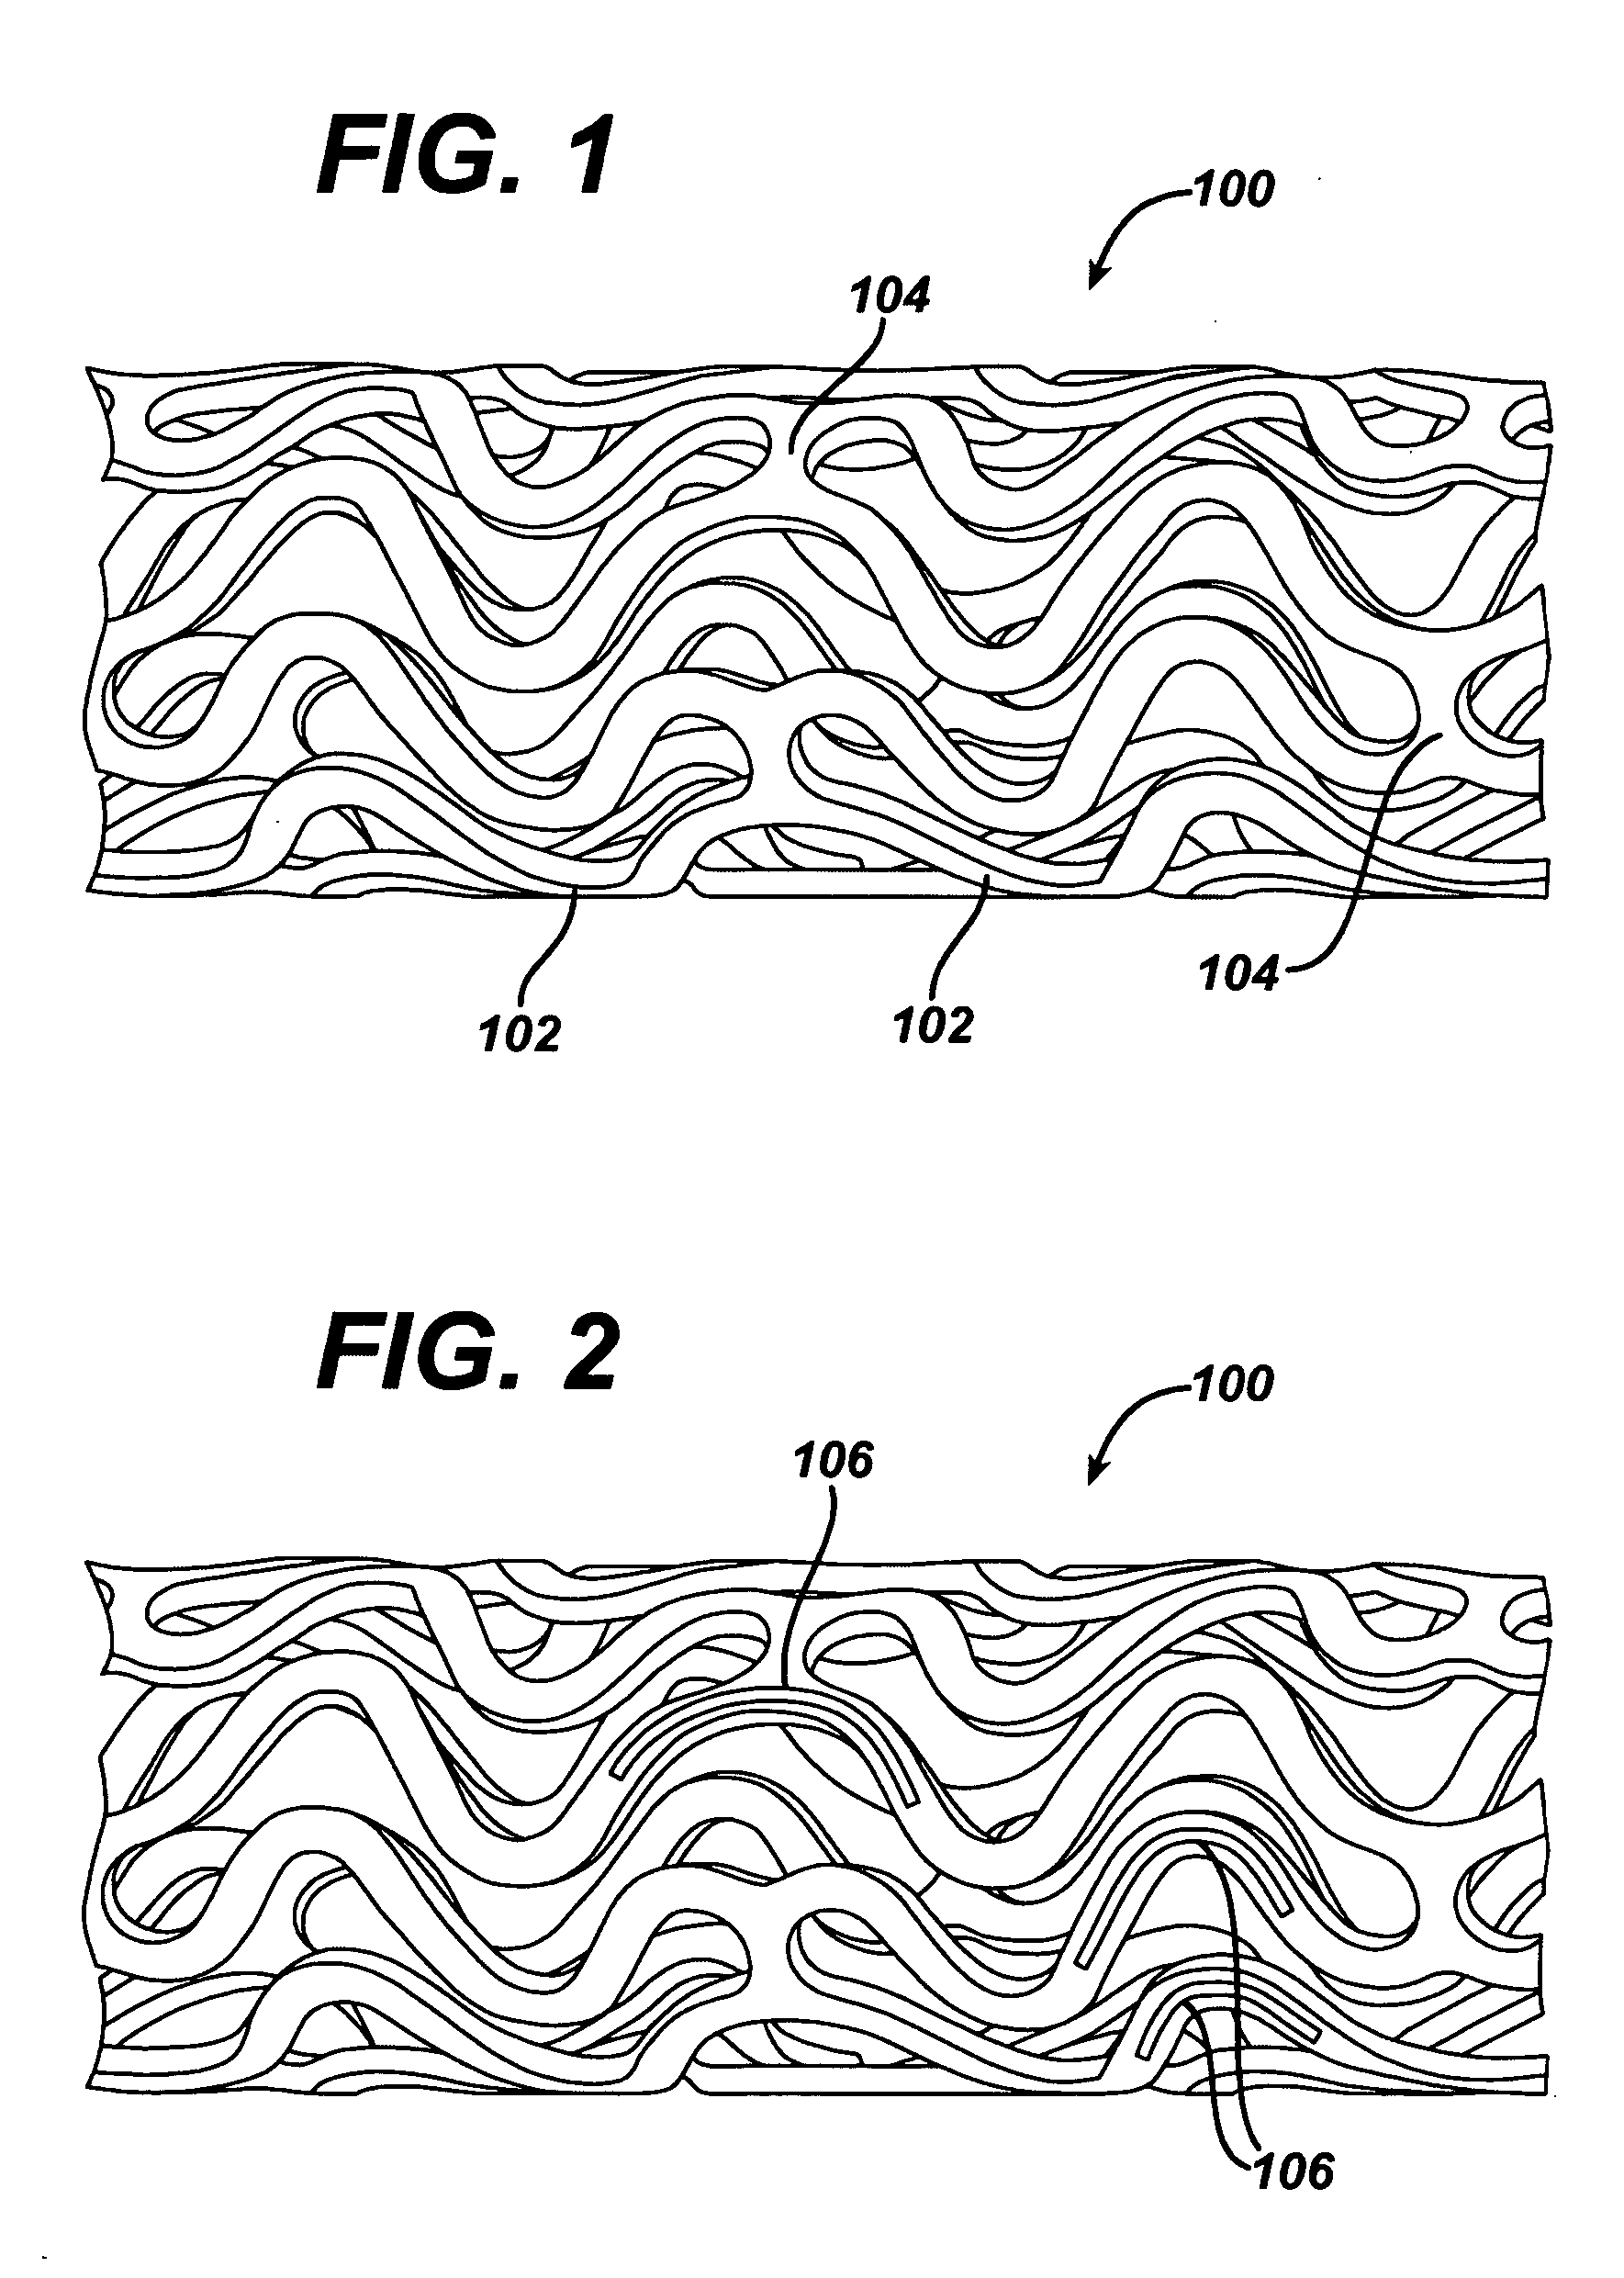 Radioprotective compound coating for medical devices